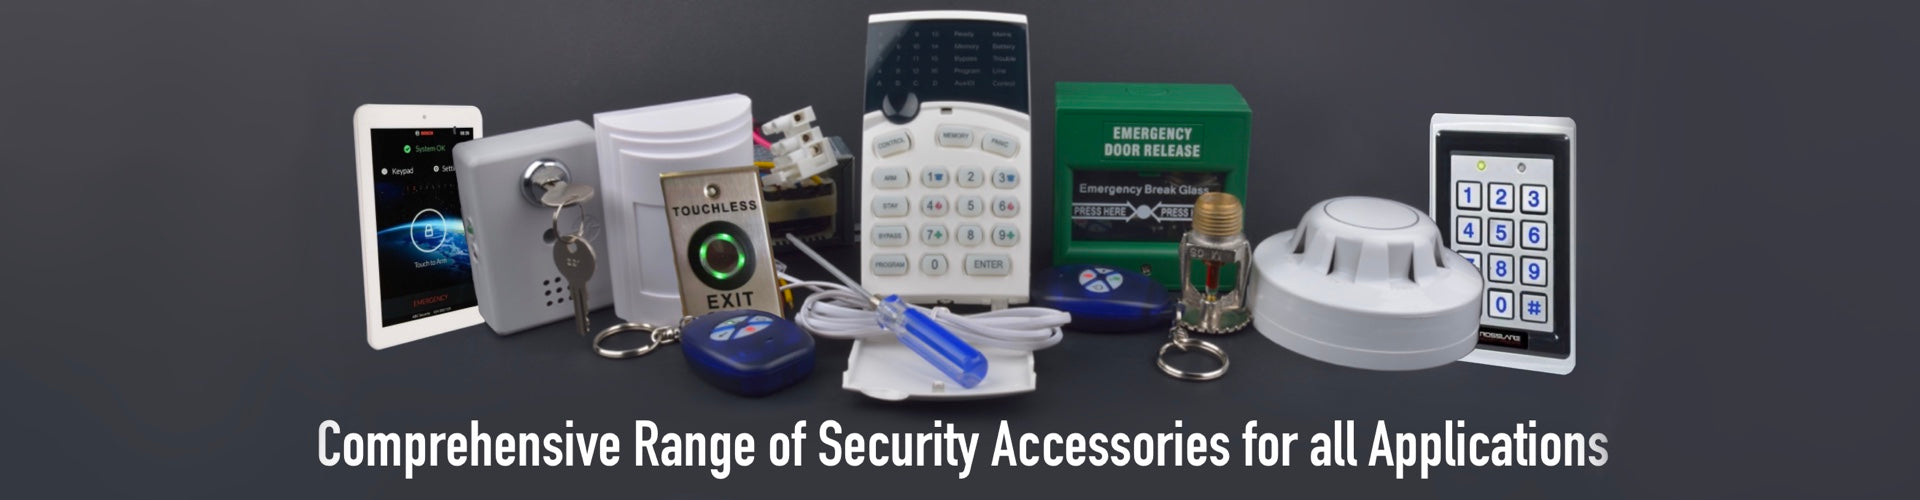 Security Accessories